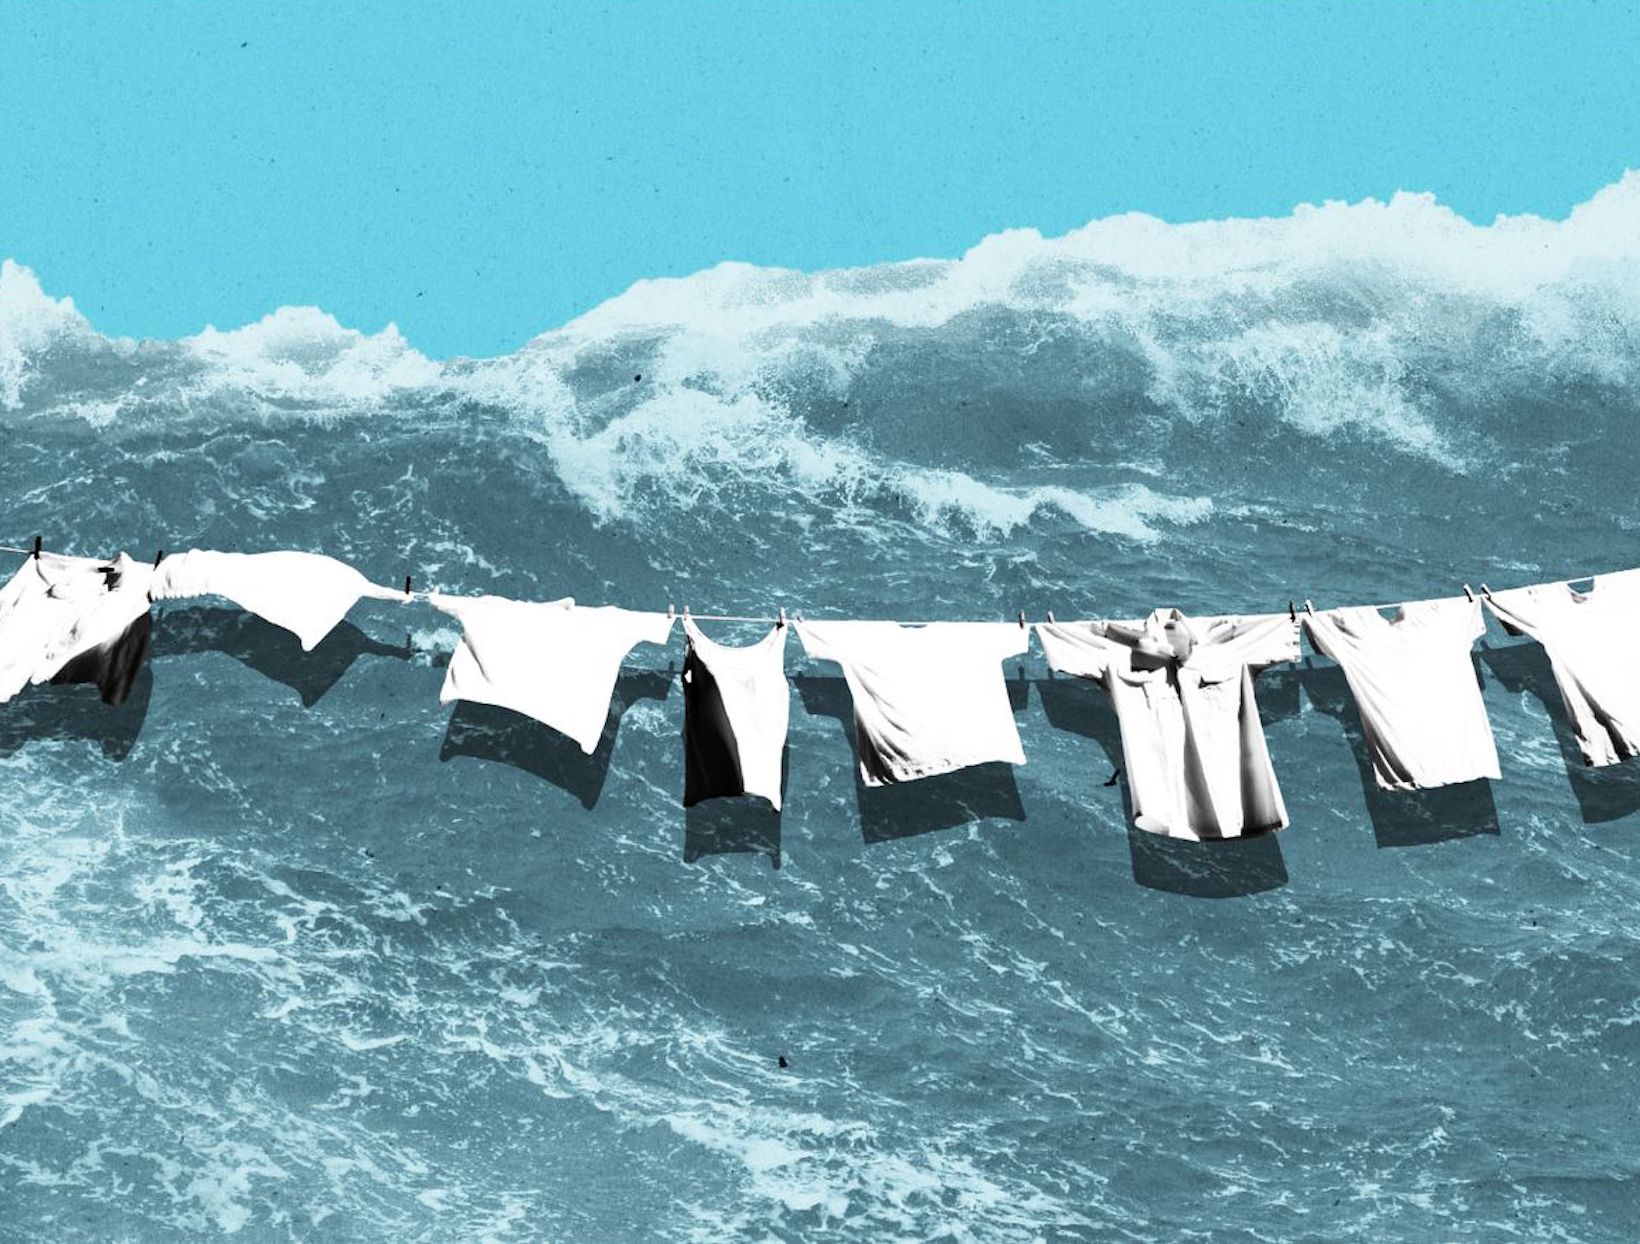 More Than Ever, Our Clothes Are Made of Plastic. Just Washing Them Can Pollute the Oceans.